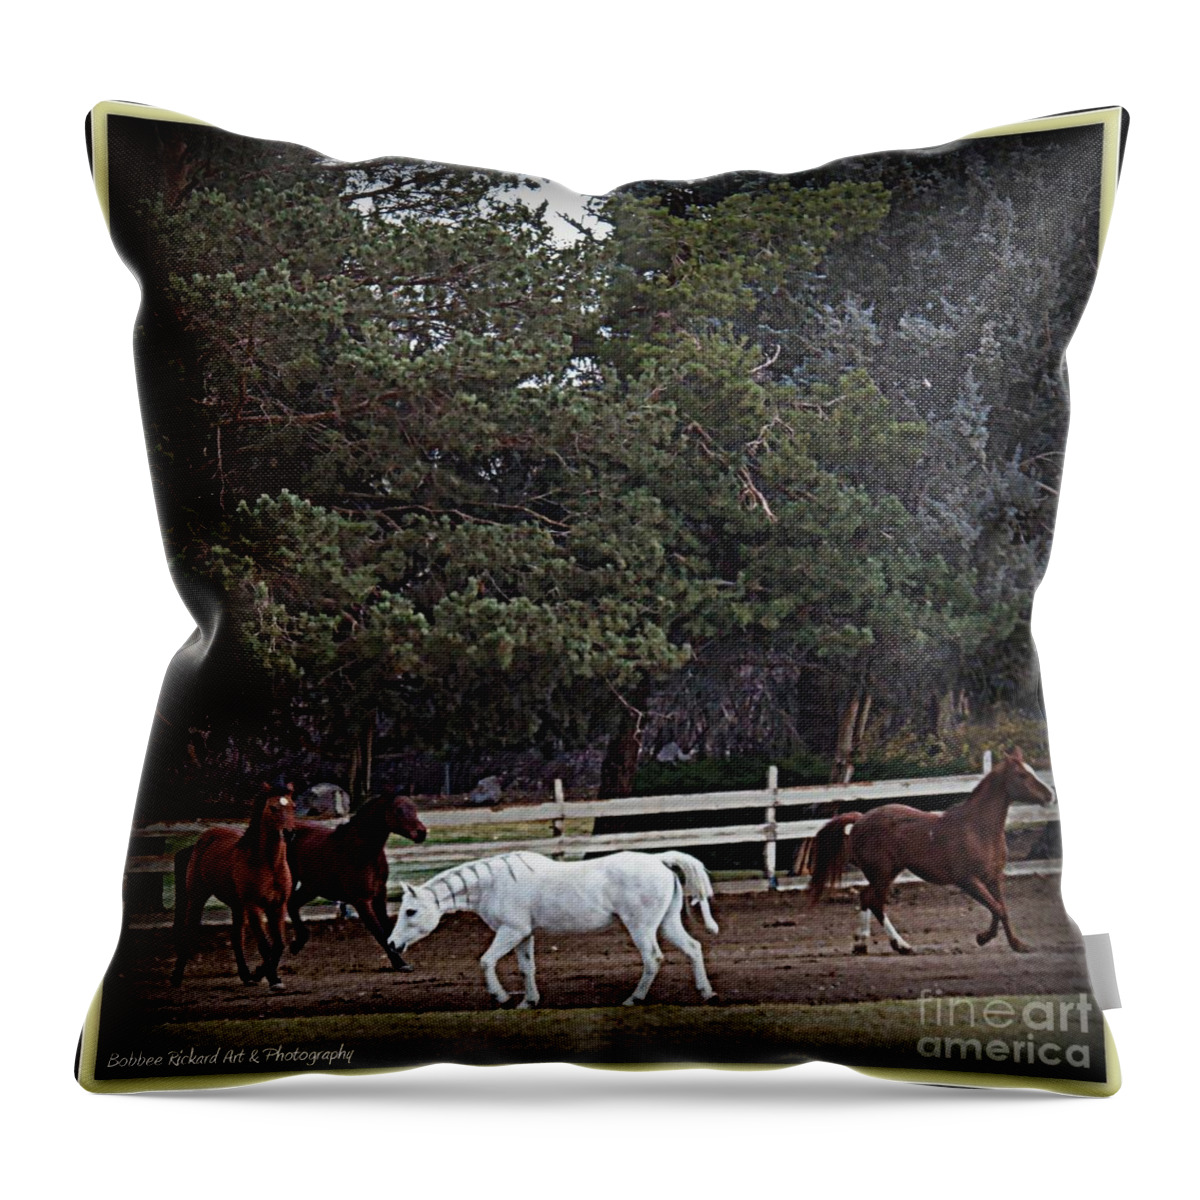 Acrylic Prints Throw Pillow featuring the photograph Horse Play 3 by Bobbee Rickard